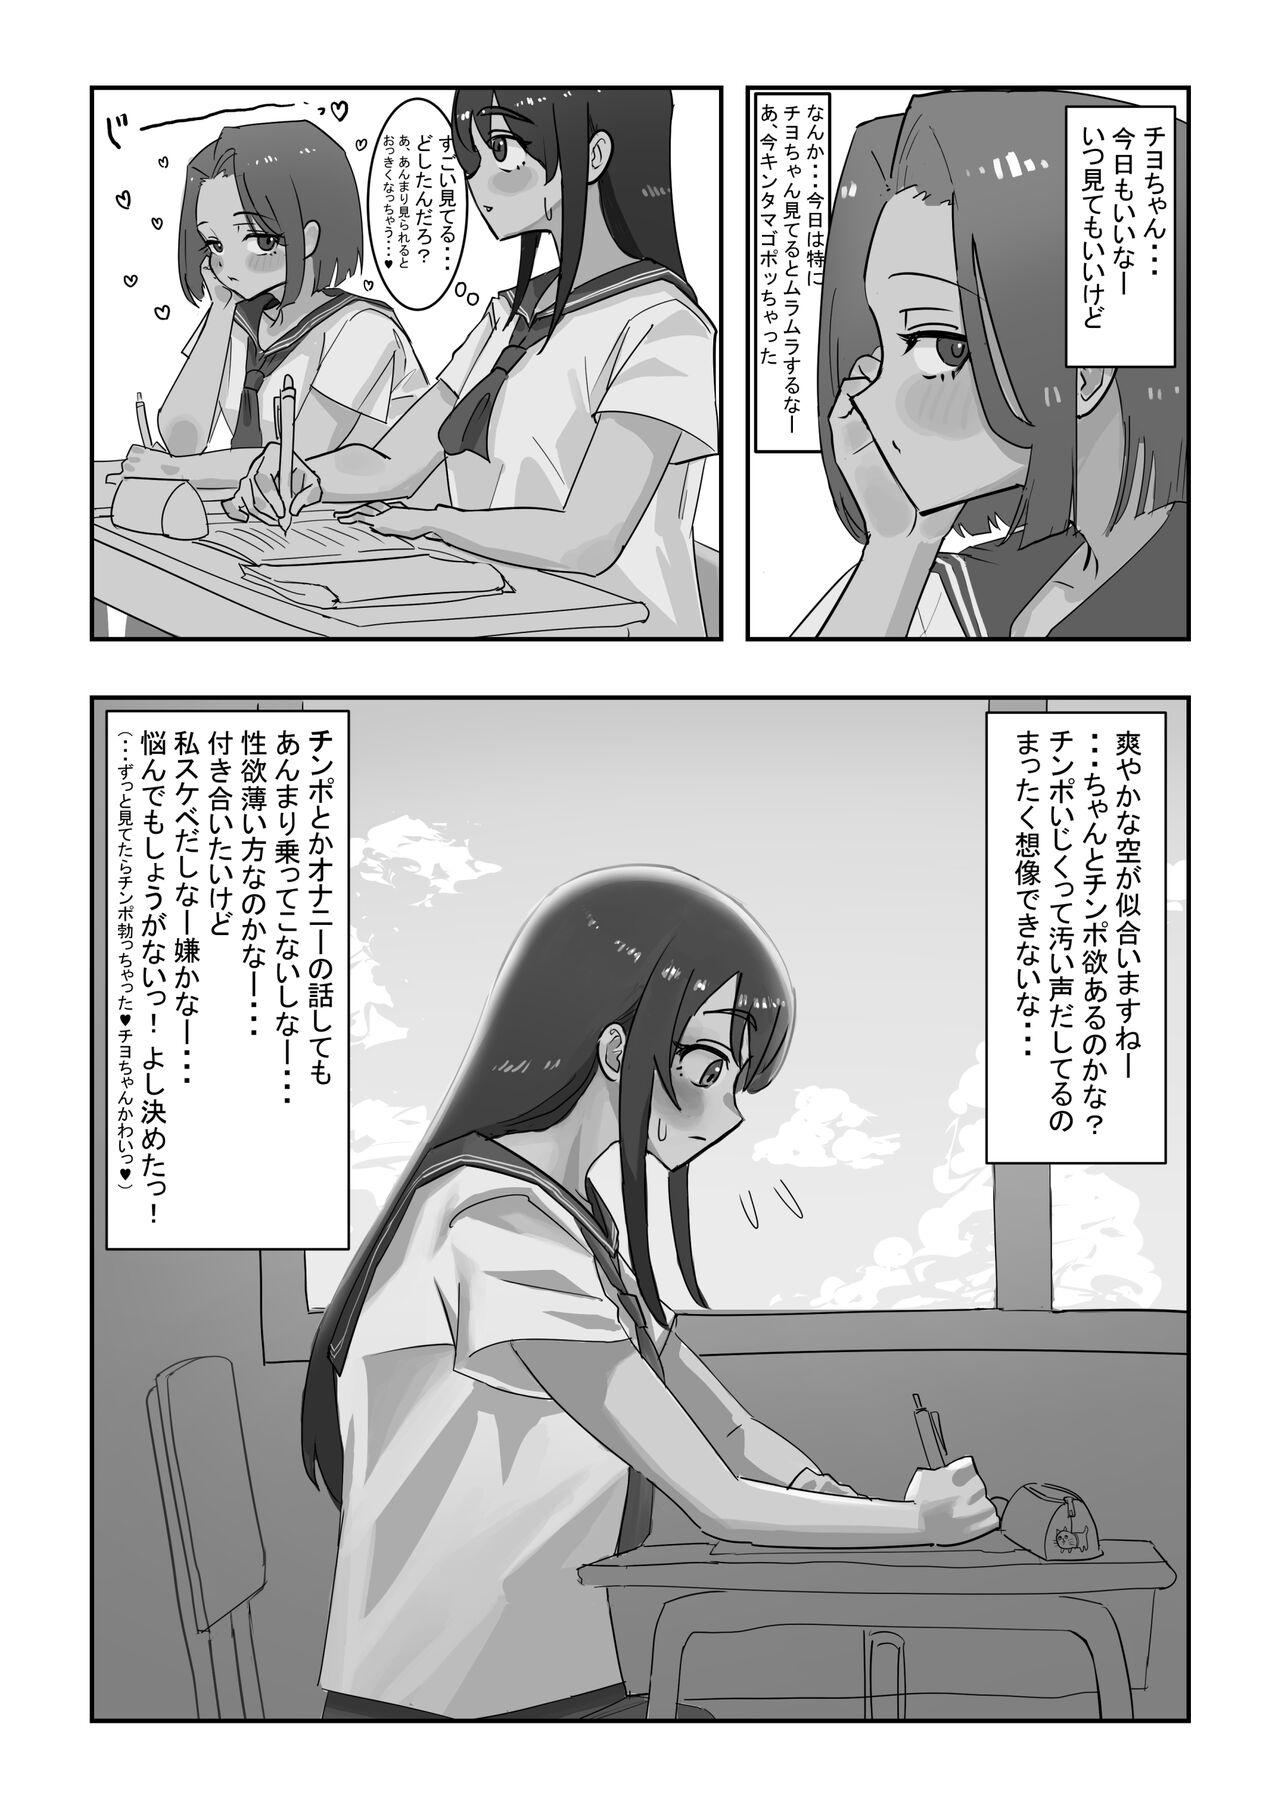 Onahole After School 2